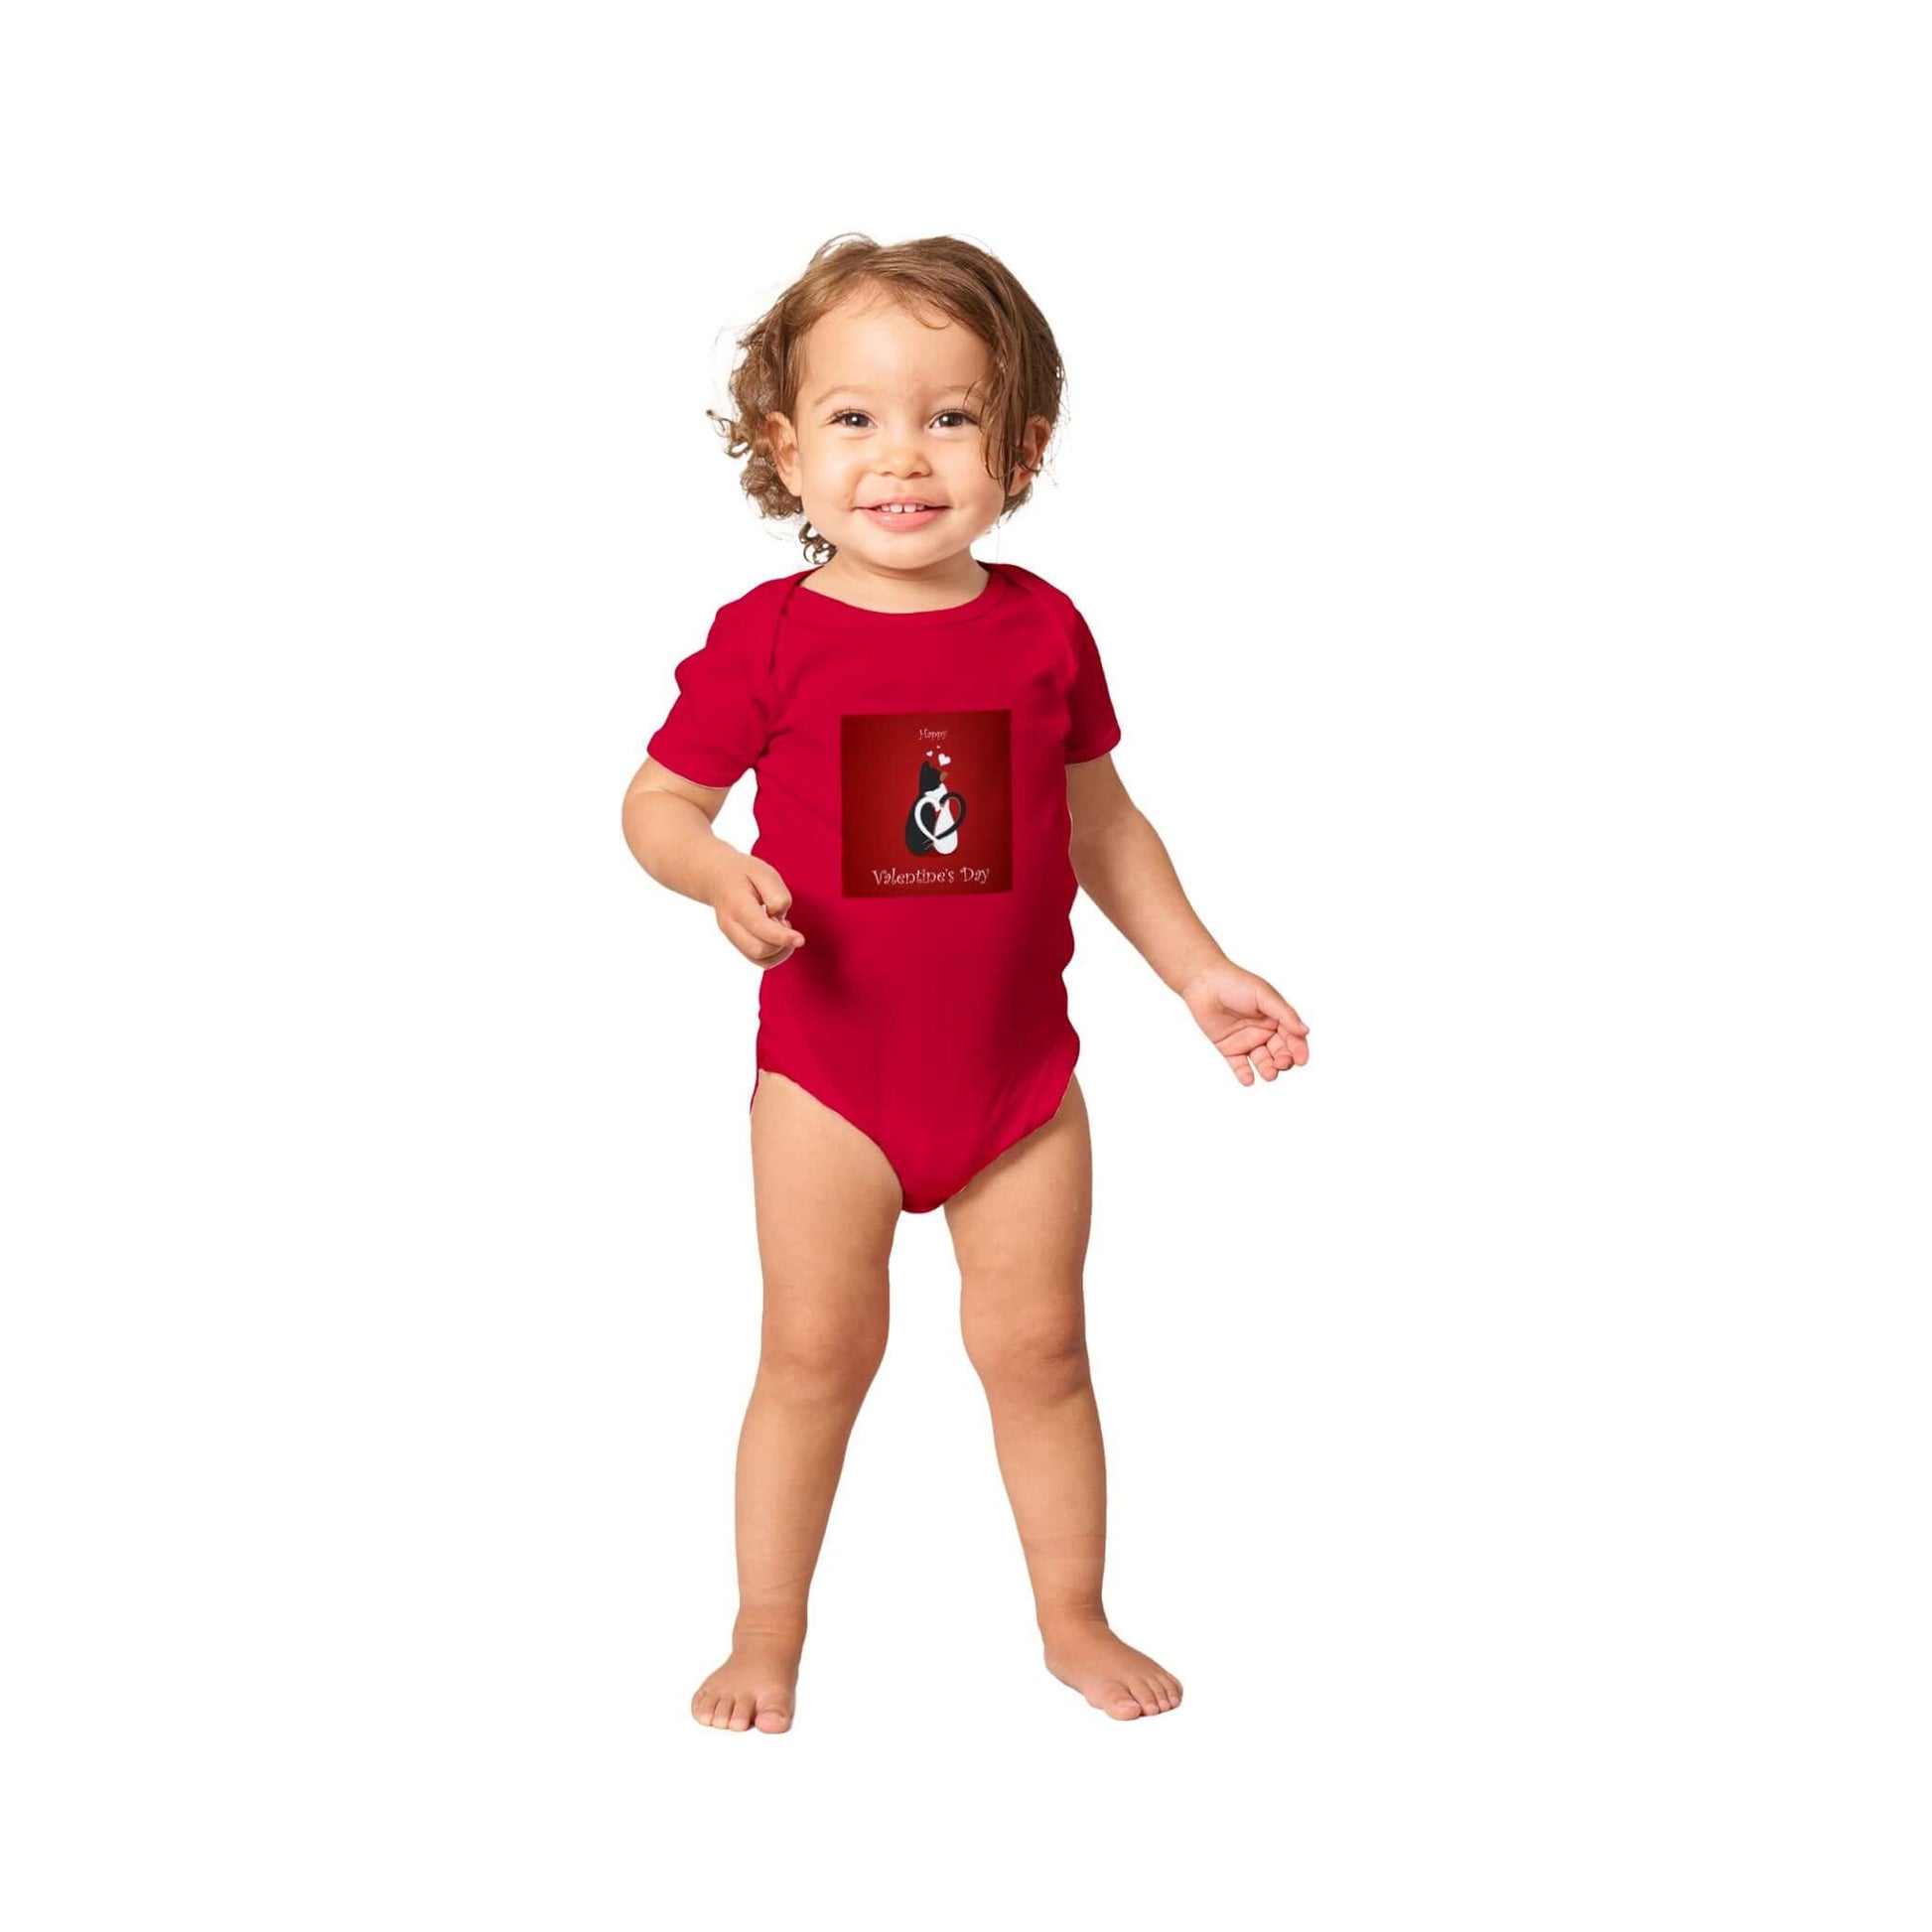 Valentine's Day Baby Bodysuit for Cat Lovers to be!